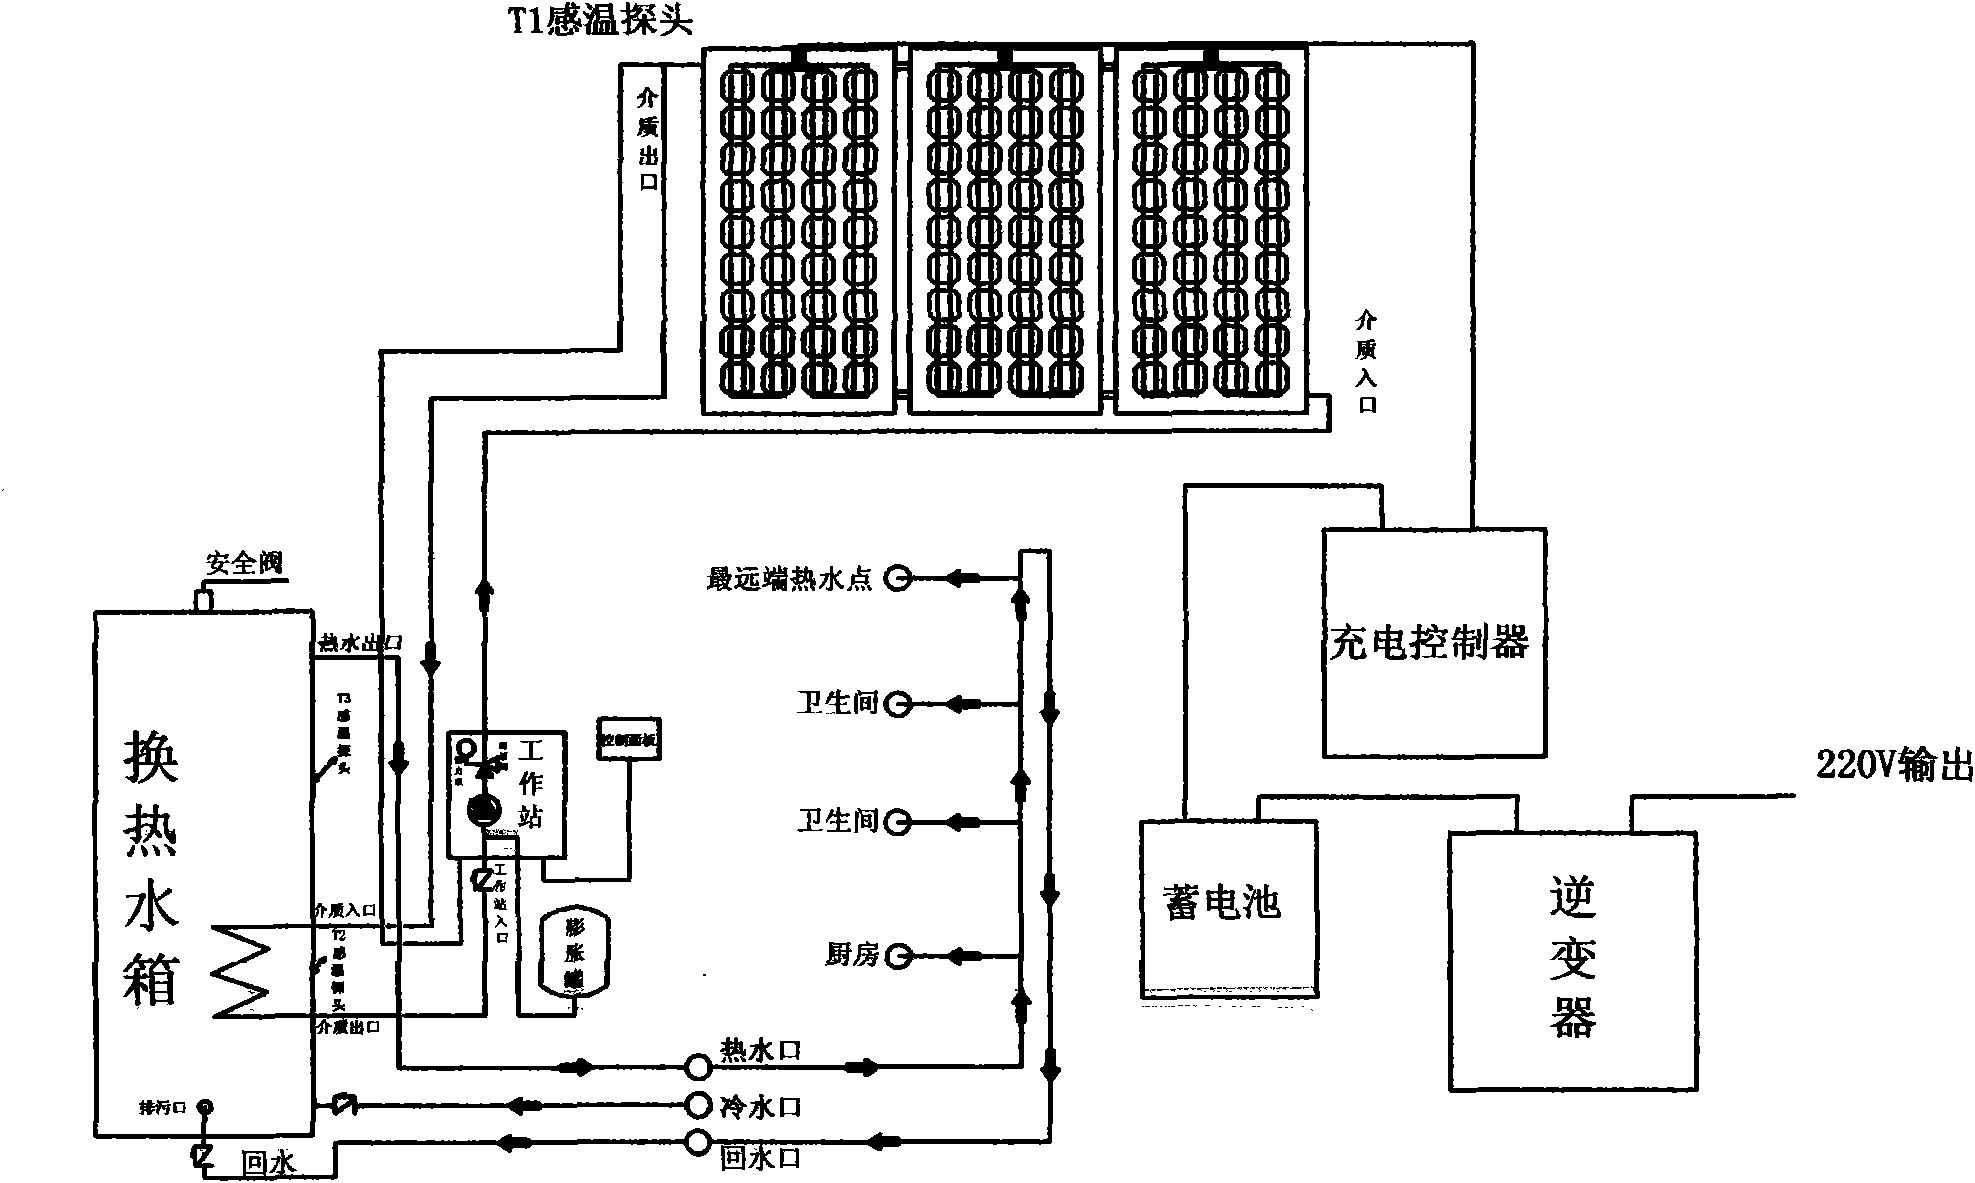 Integrated solar heat collection power generation assembly